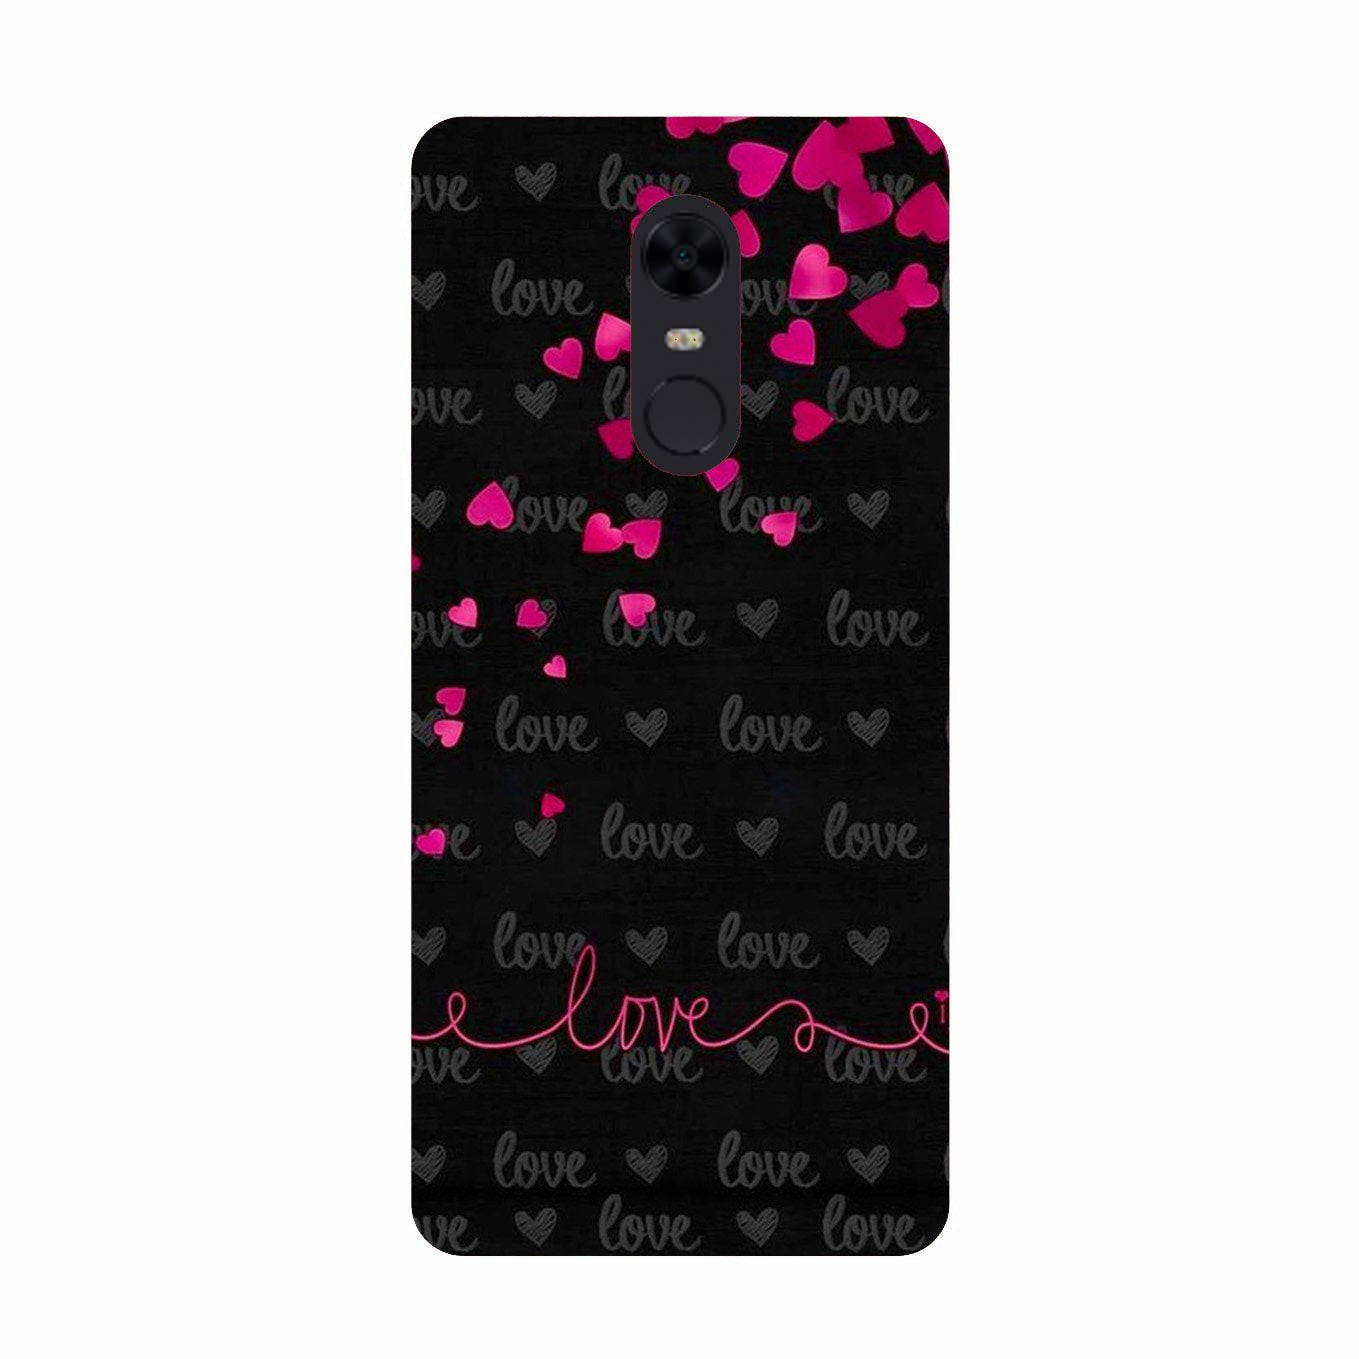 Love in Air Case for Redmi 5